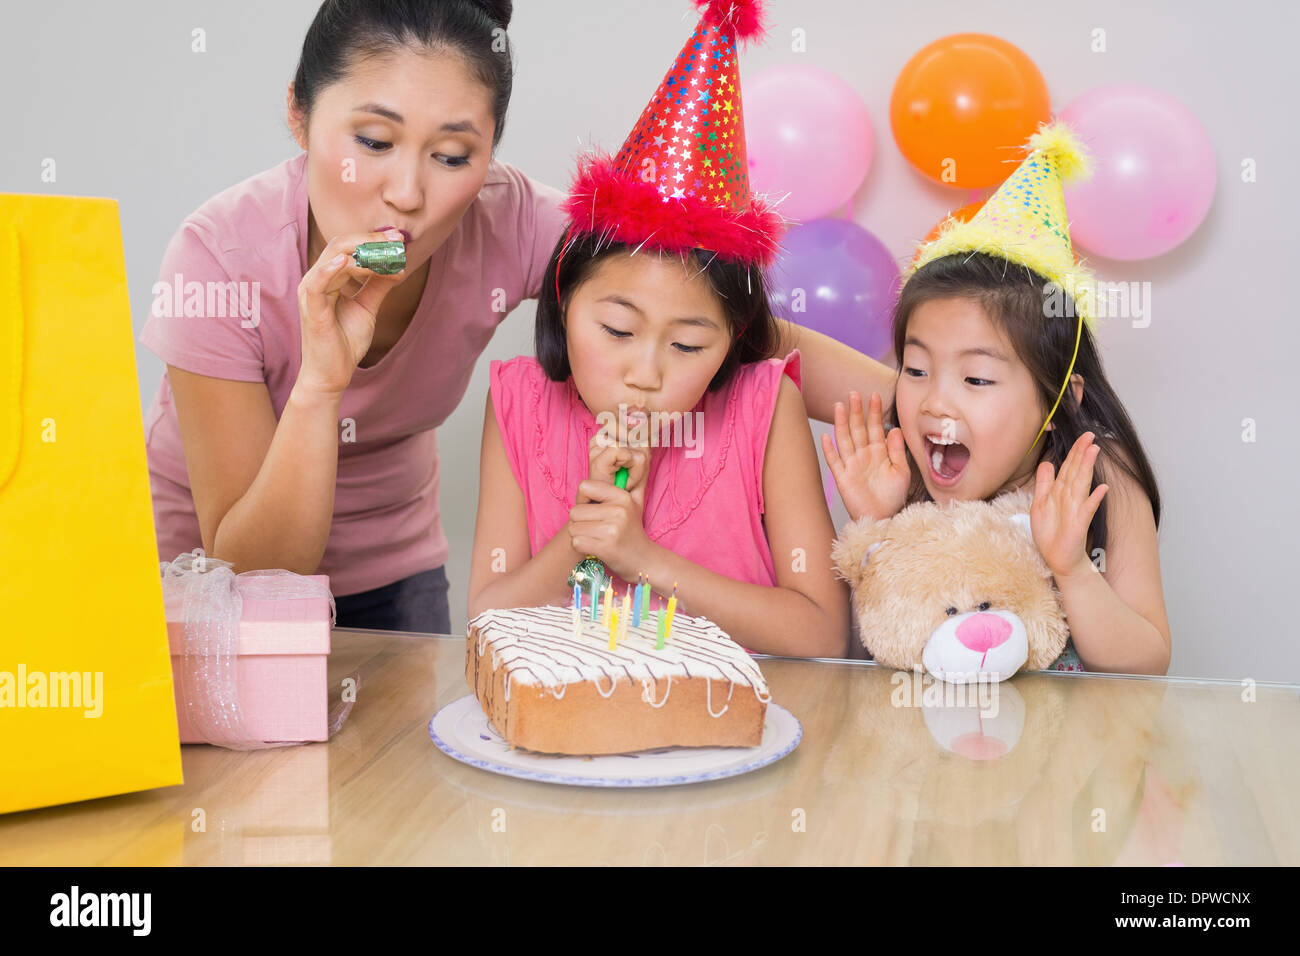 Girls and mother blowing noisemakers at a birthday party Stock Photo